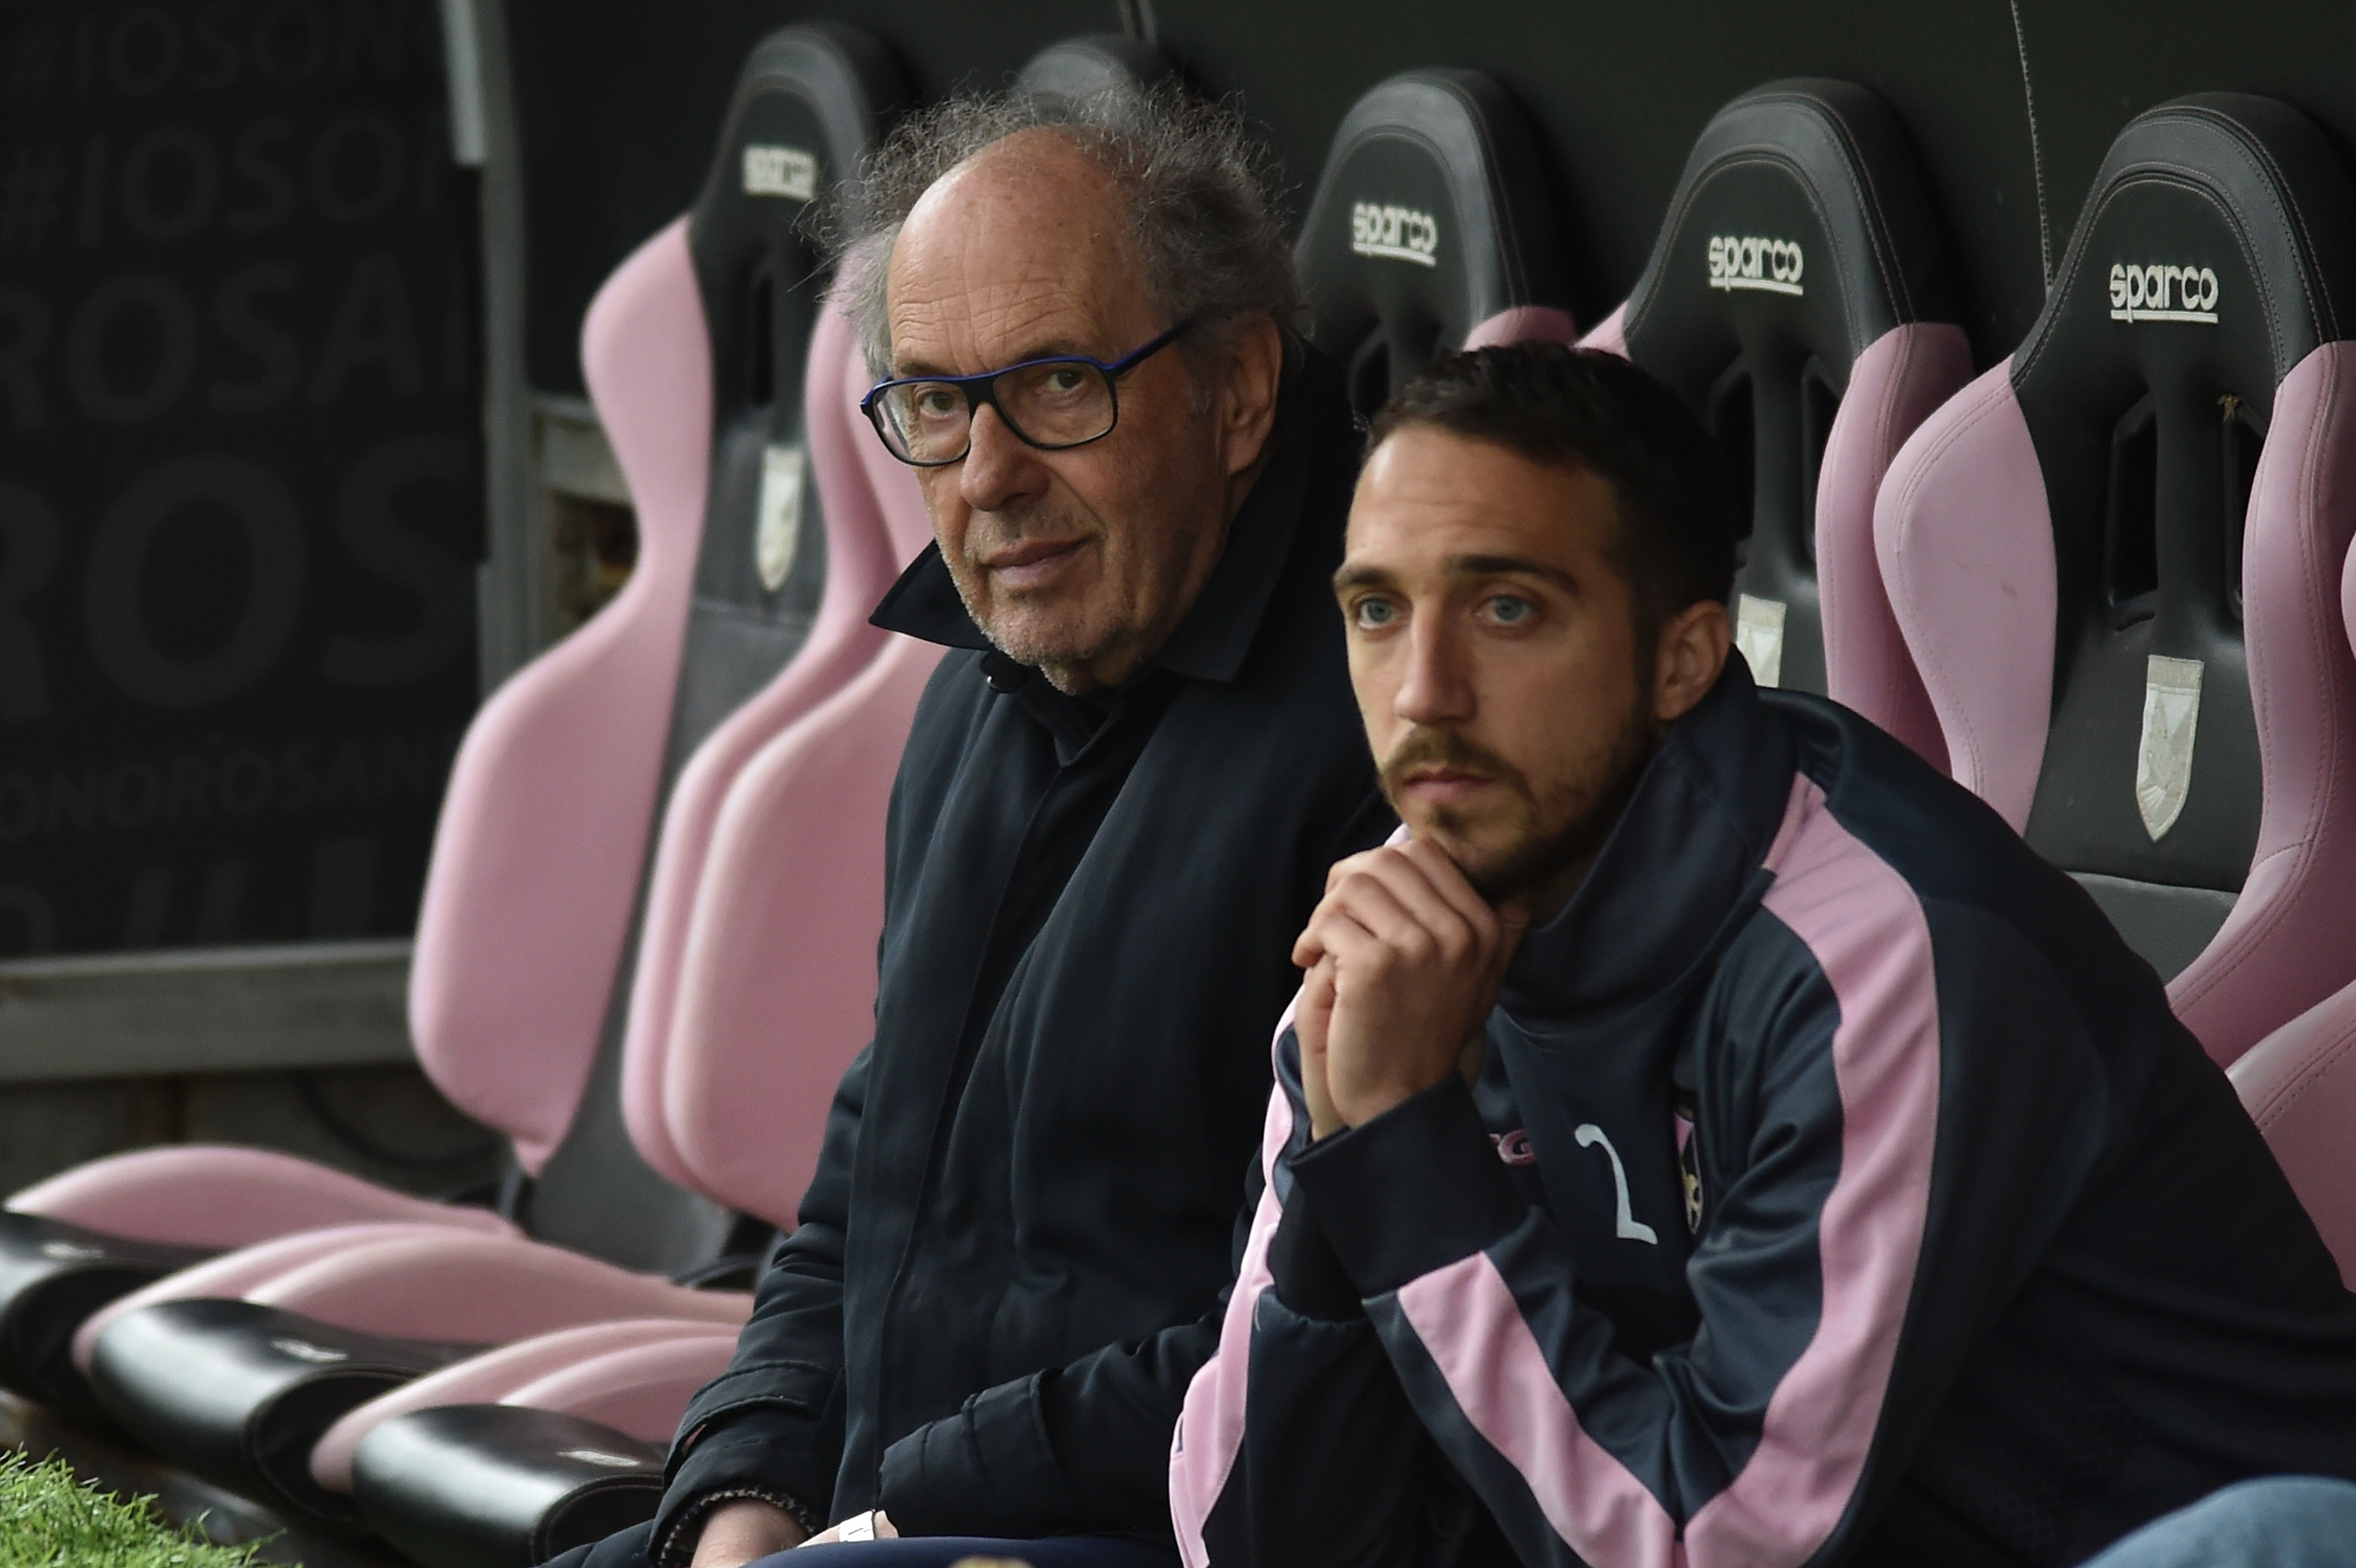 PALERMO, ITALY - MARCH 28: President Rino Foschi of Palermo looks on during a US Citta' di Palermo training session at Stadio Renzo Barbera on March 28, 2019 in Palermo, Italy. (Photo by Tullio M. Puglia/Getty Images)